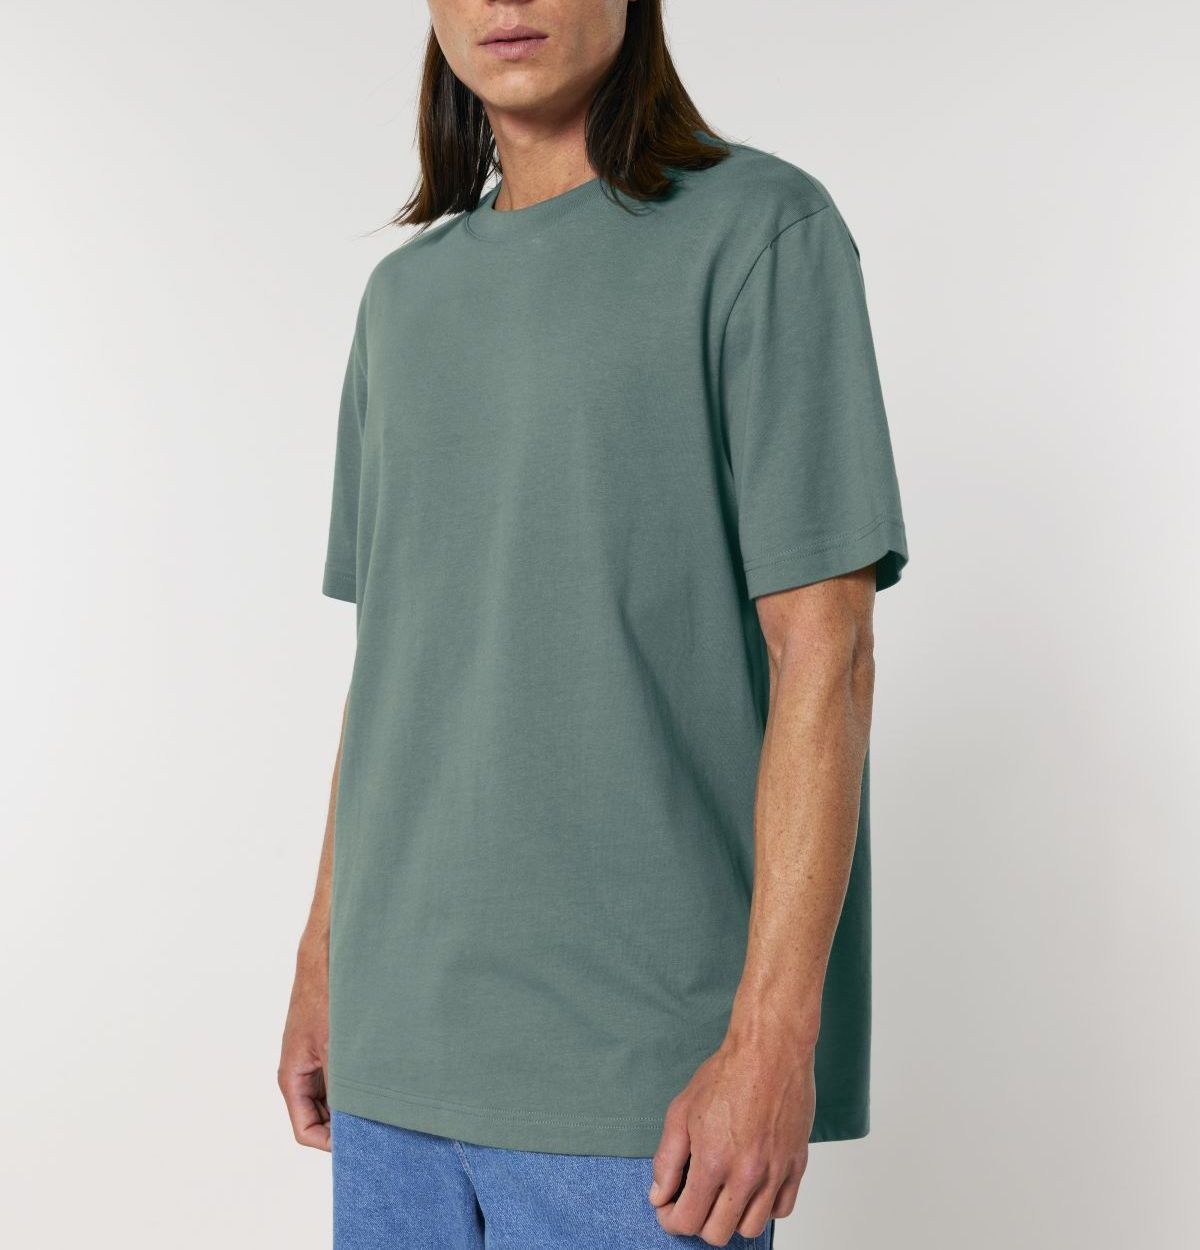 Loose-Fit T-Shirt Modell: Spades